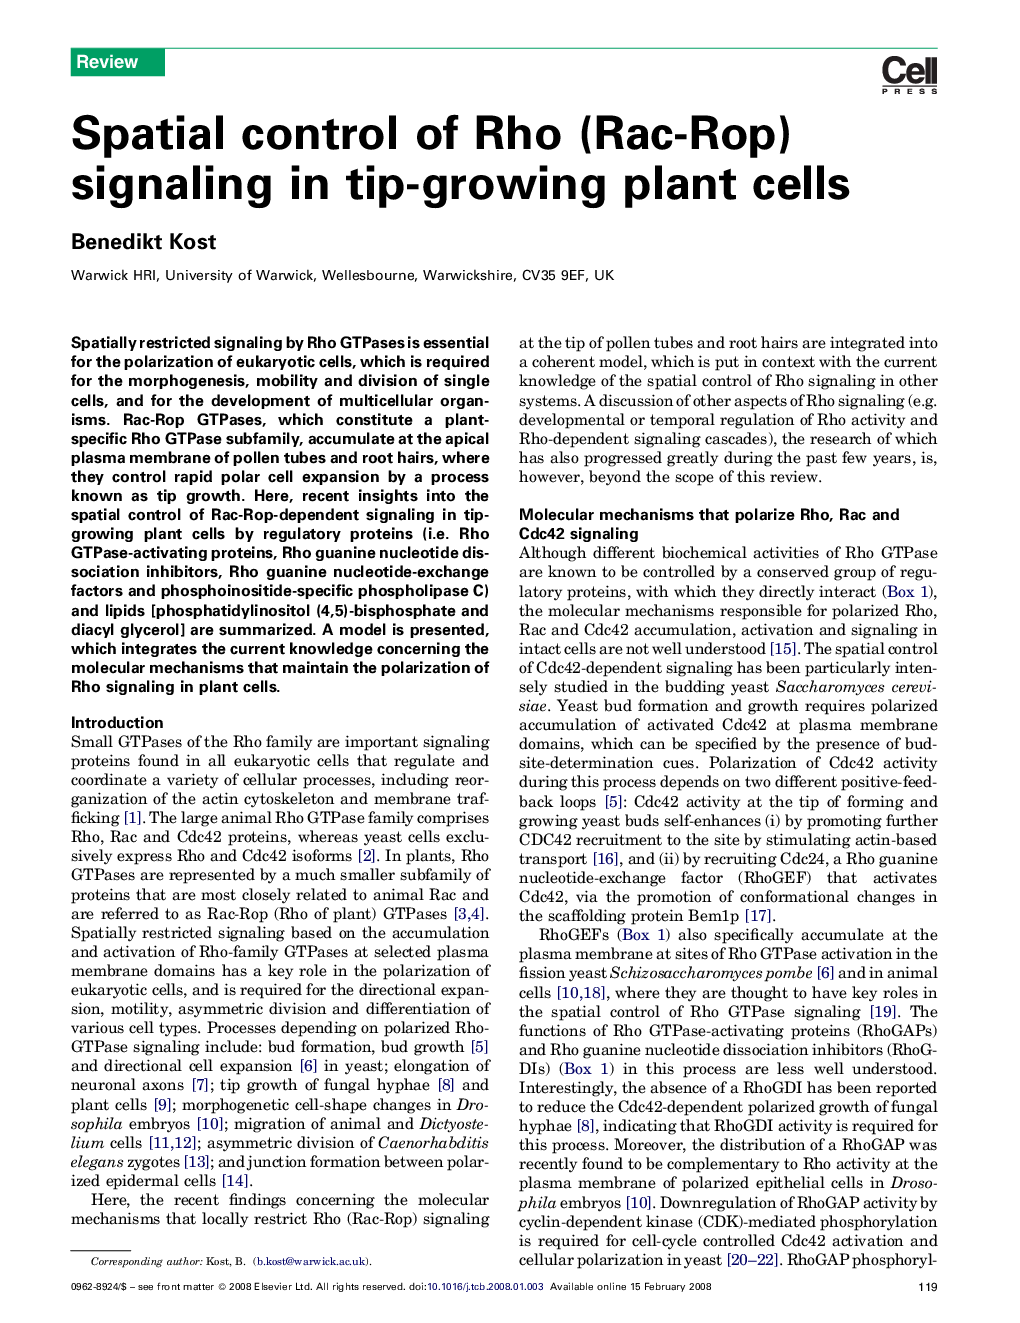 Spatial control of Rho (Rac-Rop) signaling in tip-growing plant cells